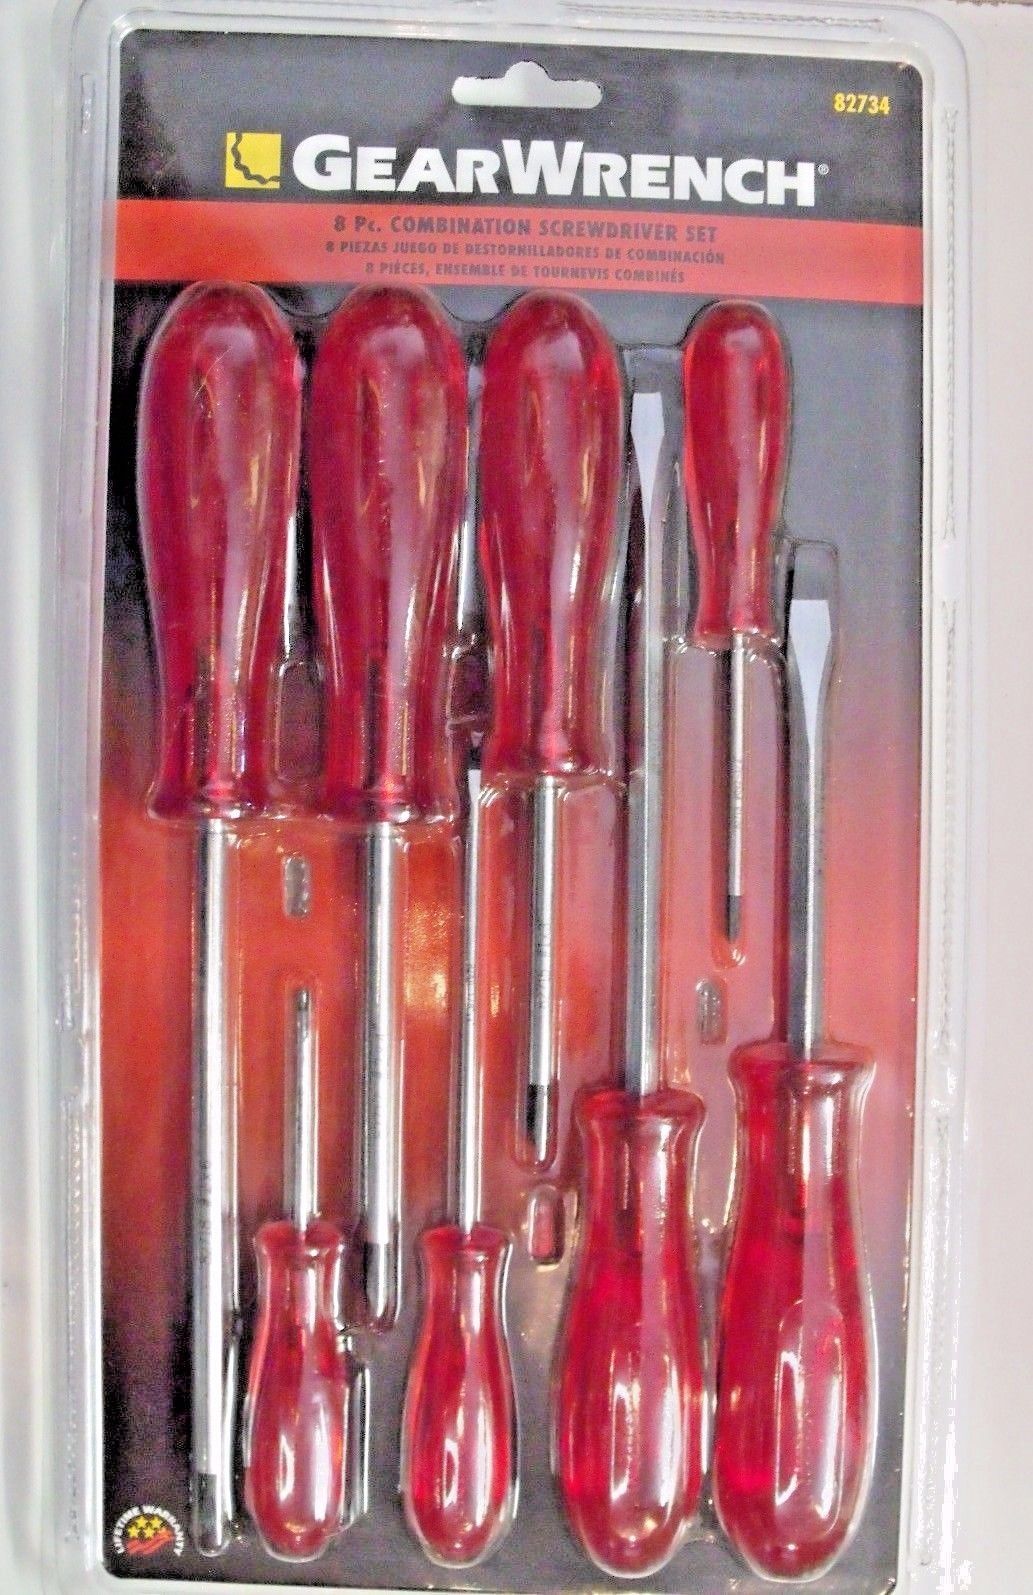 Gearwrench 82734 8 Piece Slotted / Phillips Screwdriver Set